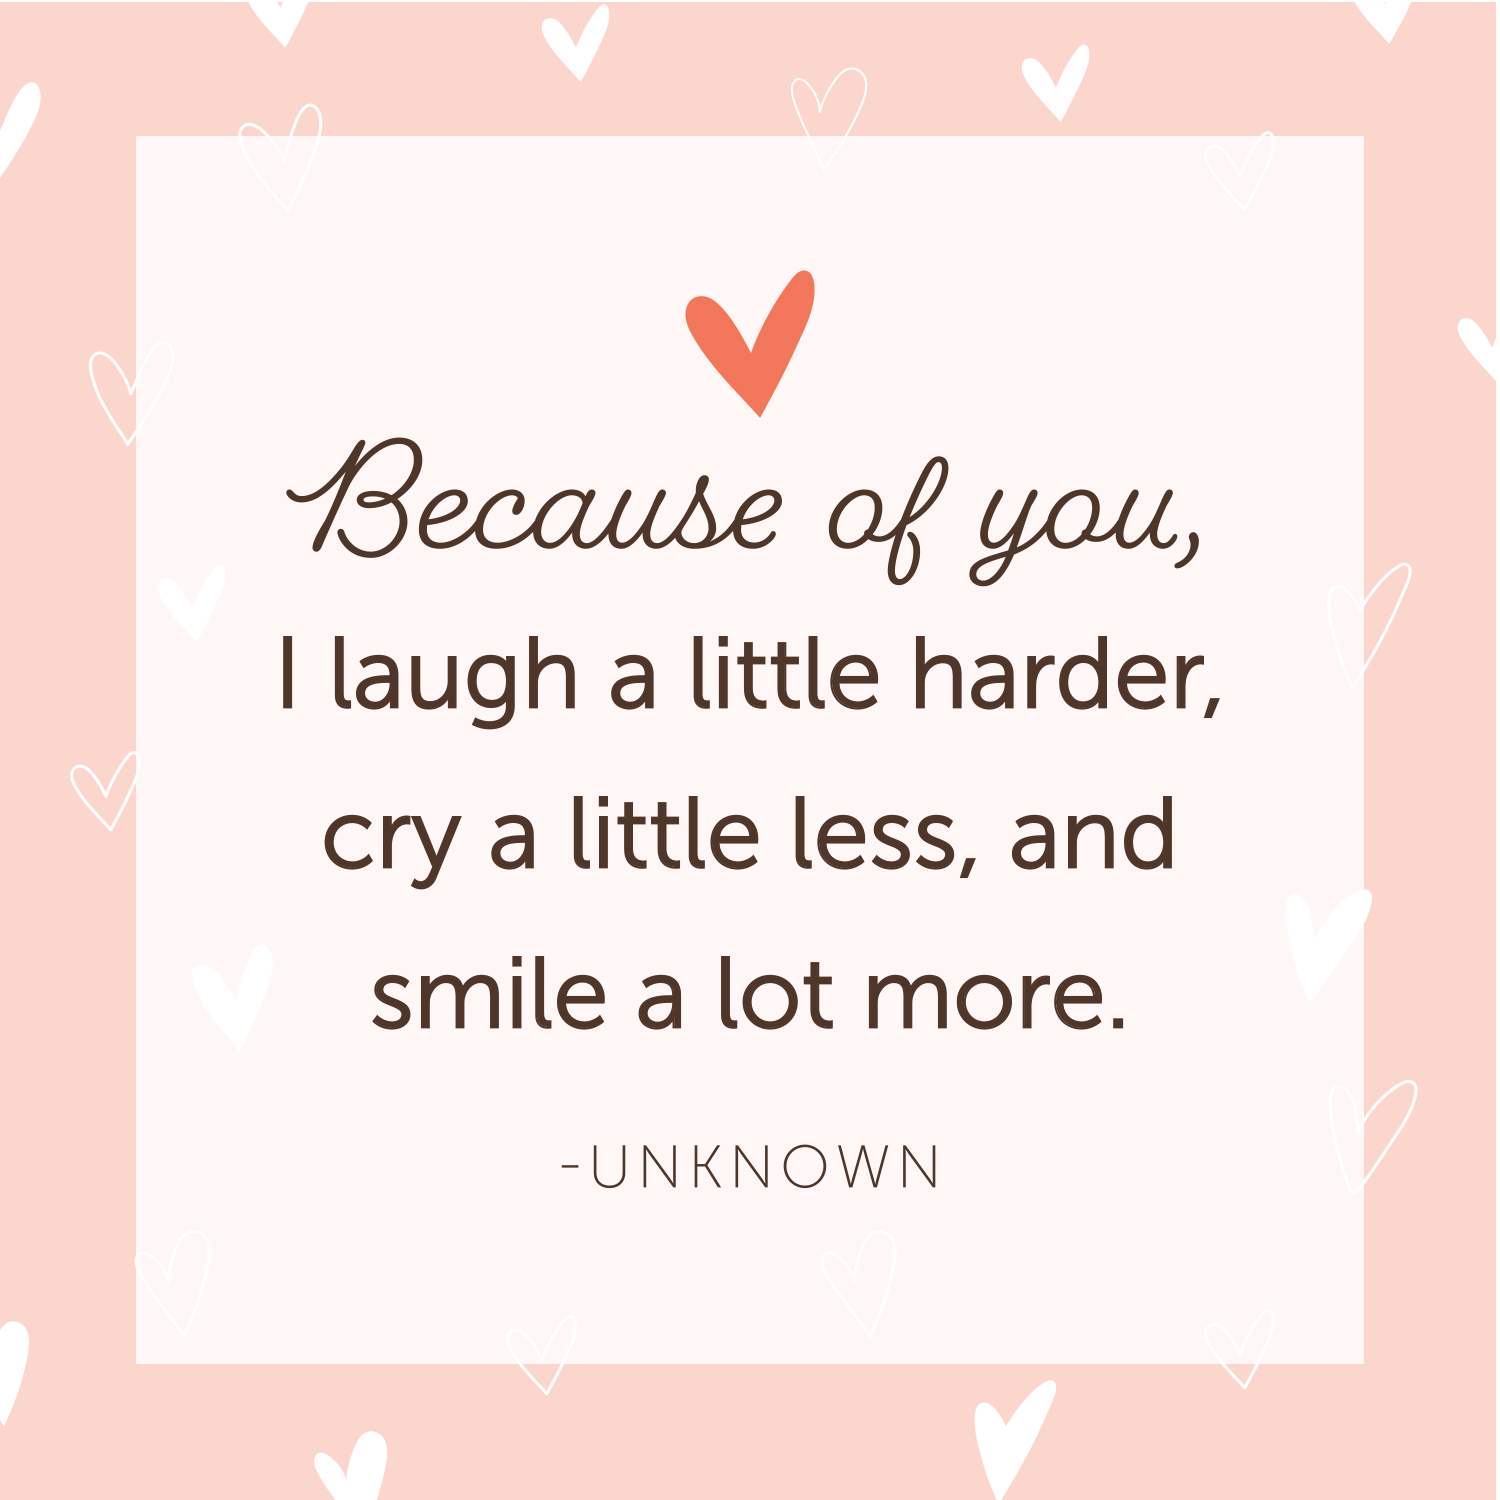 Best Friendship Quotes for Your BFF | Shari's Berries